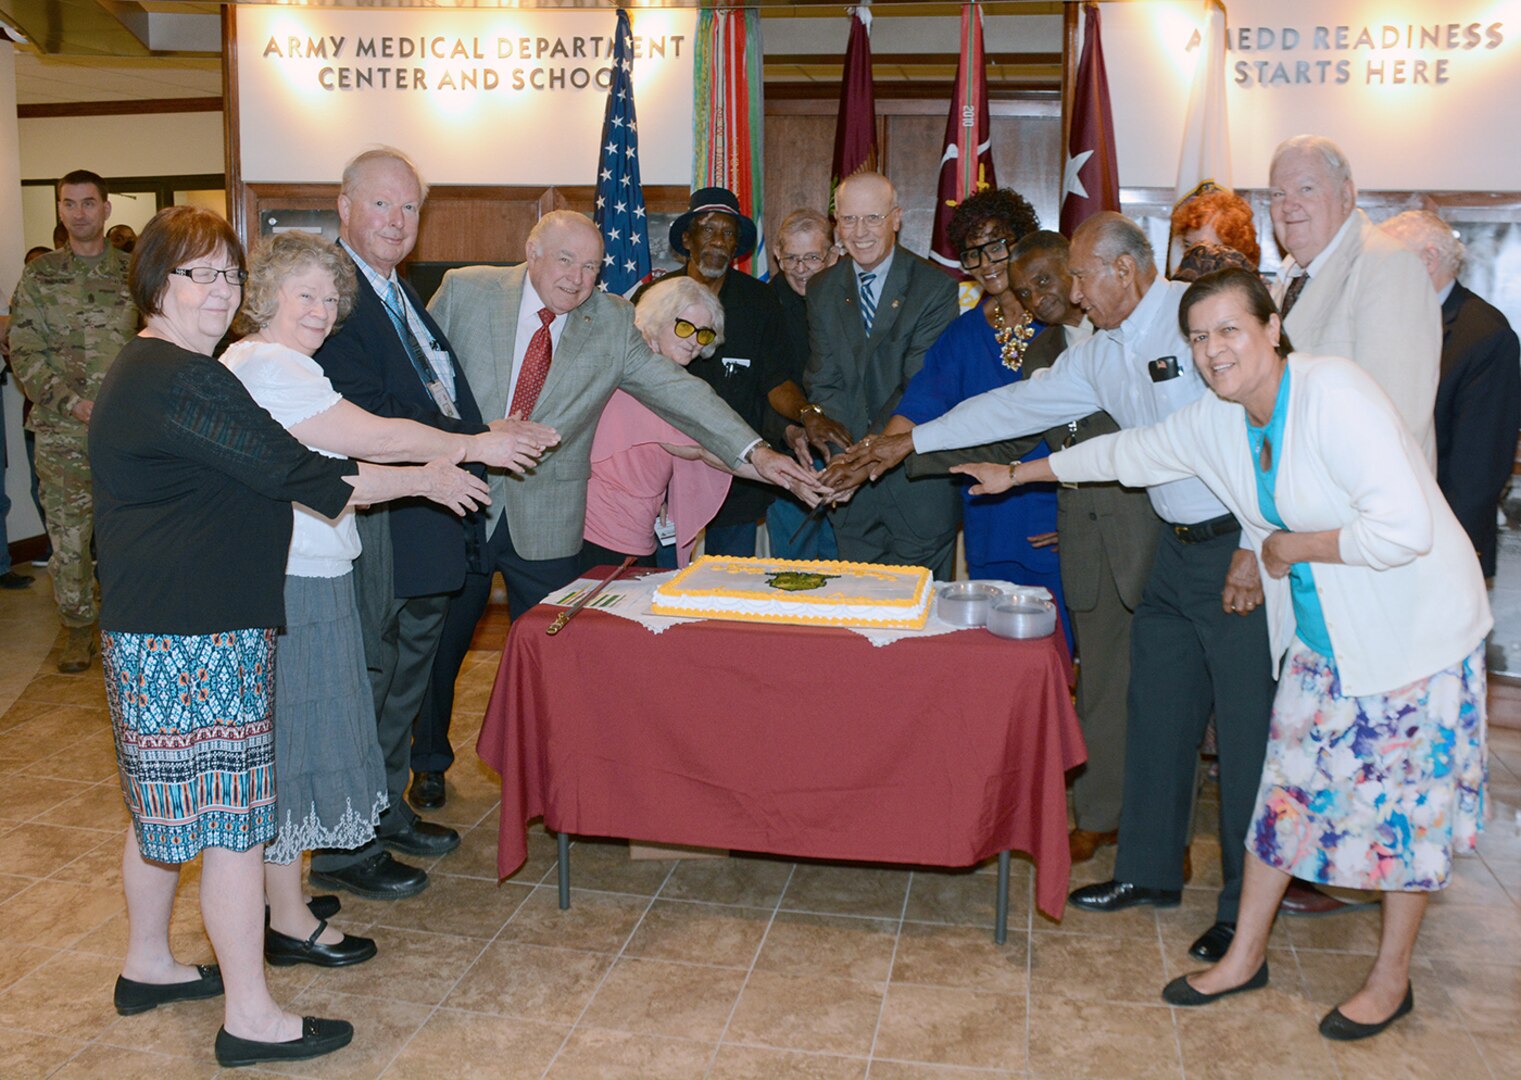 Charles G. (Gregg) Stevens, SES, Army Medicine Civilian Corps Chief, along with some of the longest serving members of the Civilian Corps, cut a cake celebrating the 21st anniversary of the corps. The Army Medical Department Civilian Corps was established on March 26, 1996.